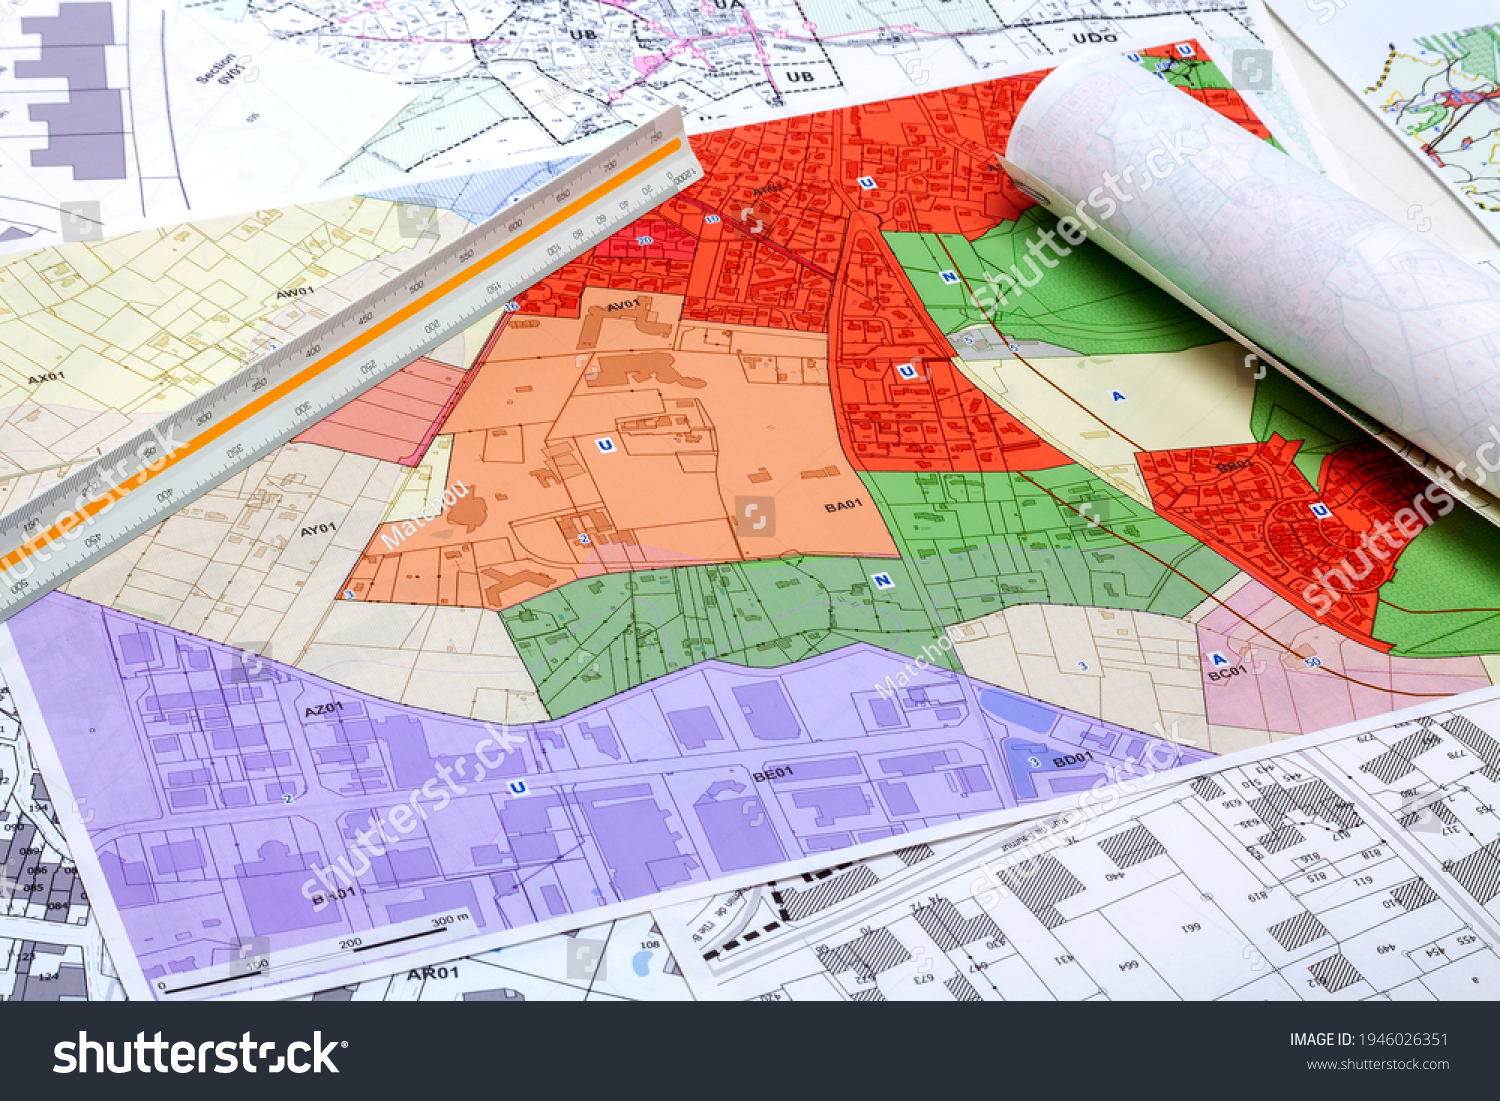 Town planning - Land use planning - Local town planning and cadastre maps  #1946026351